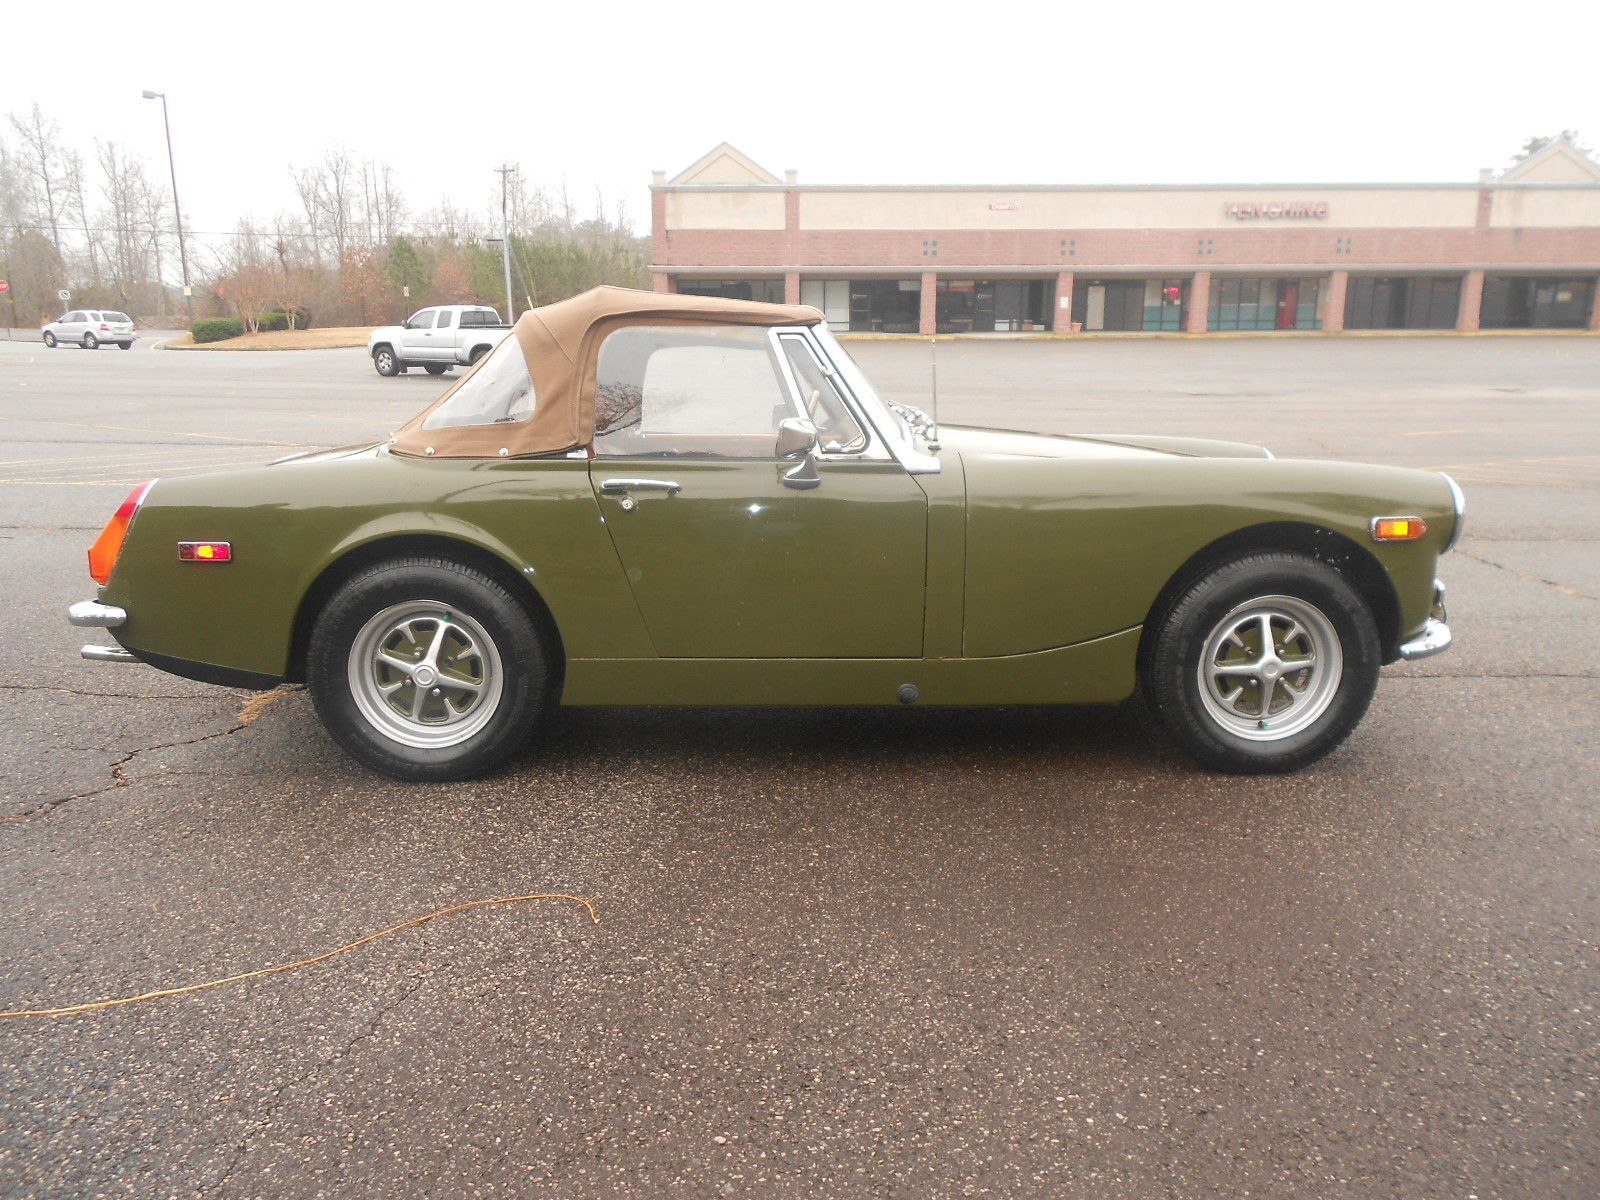 1973 MG Midget with 7,600 miles, chrome bumpers and 5 